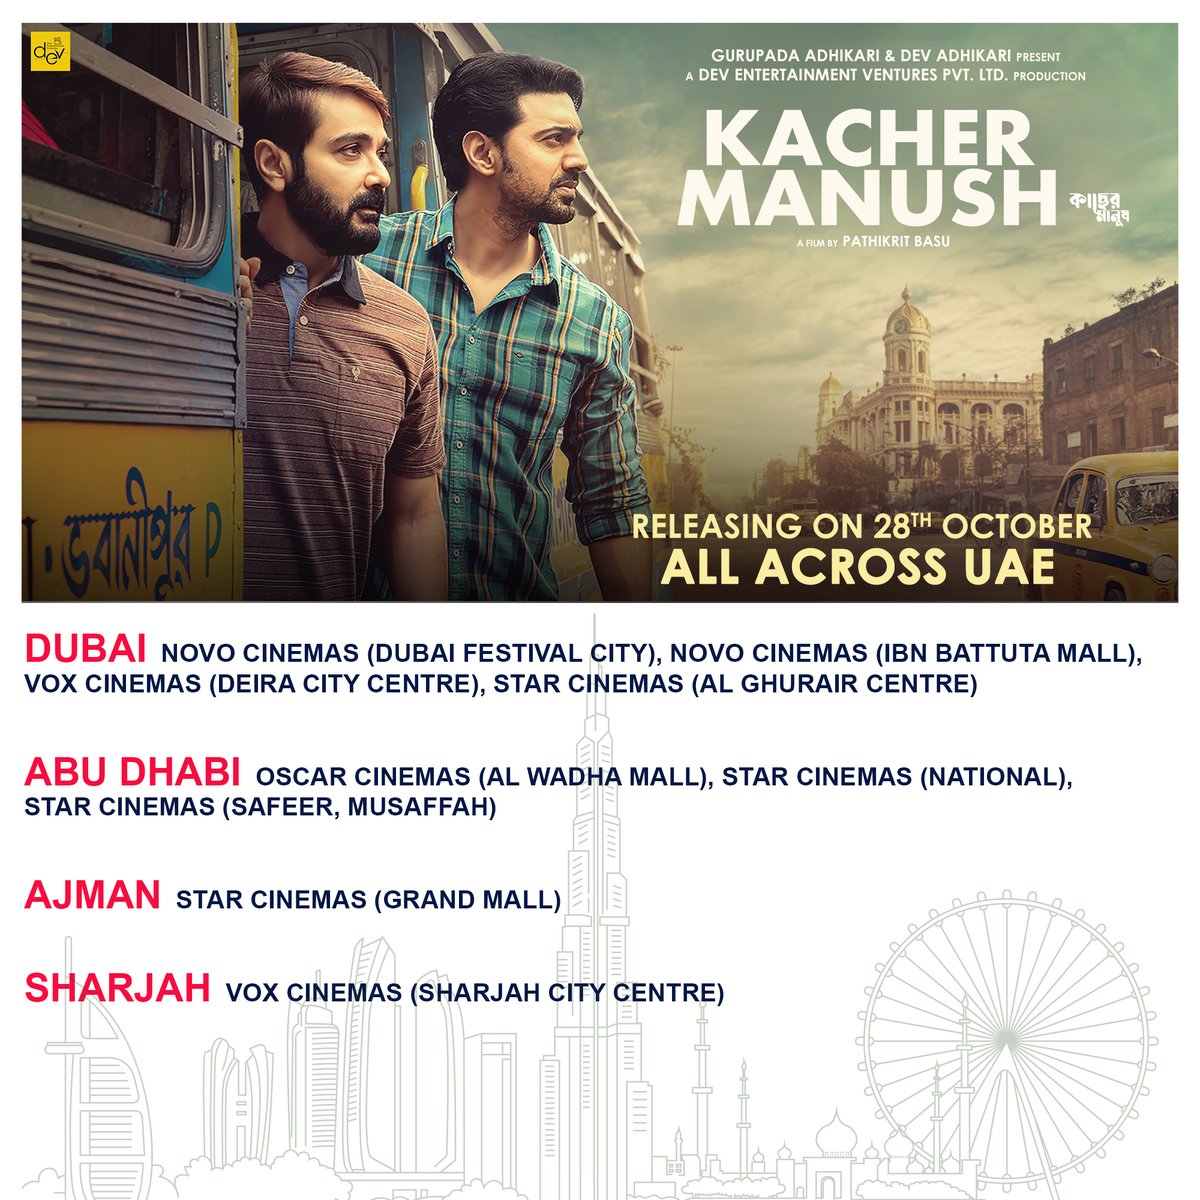 After having captured hearts in India, #KacherManush is coming to UAE to try and win some more hearts. Releasing on 28th October. @prosenjitbumba @idevadhikari @m_ishaa @susmita_cjee @Pathikrit91 @nilayanofficial @itsmodhura #UAE #ReleasingOn28thOctober #BookYourTickets